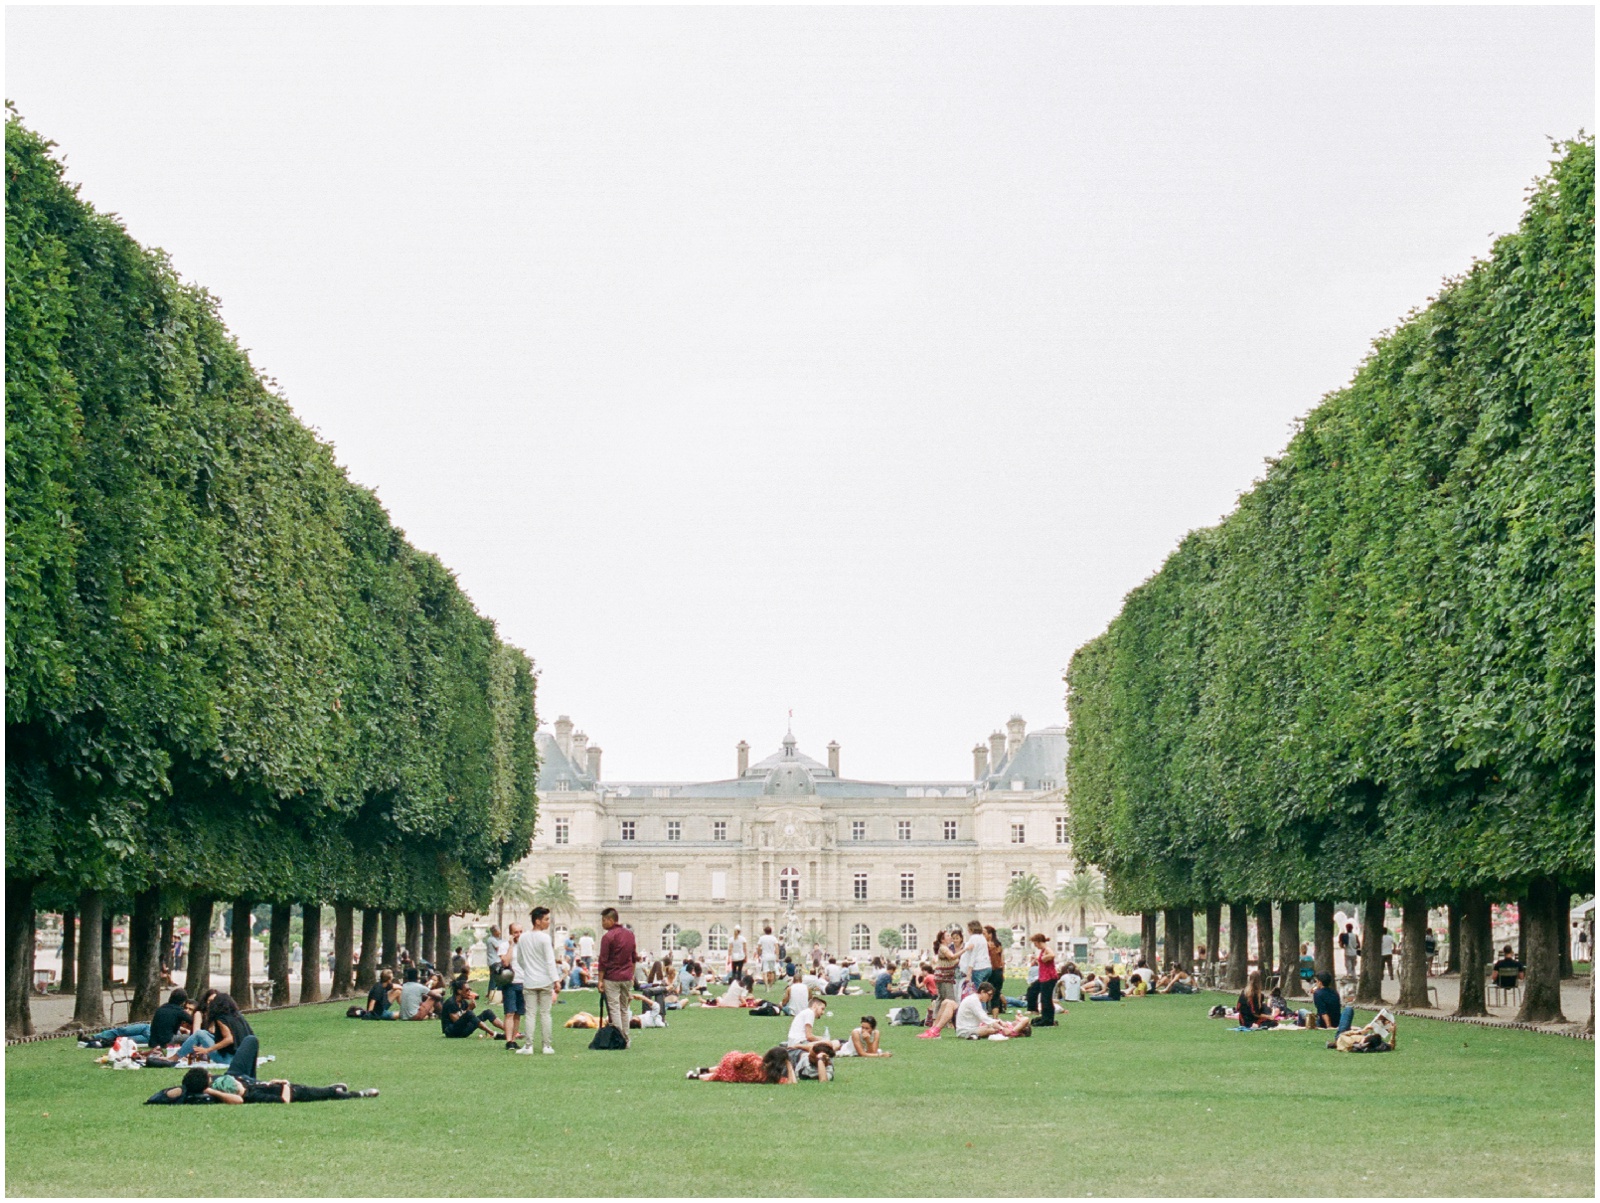 trees lining a grassy field with luxembourg palace in the background